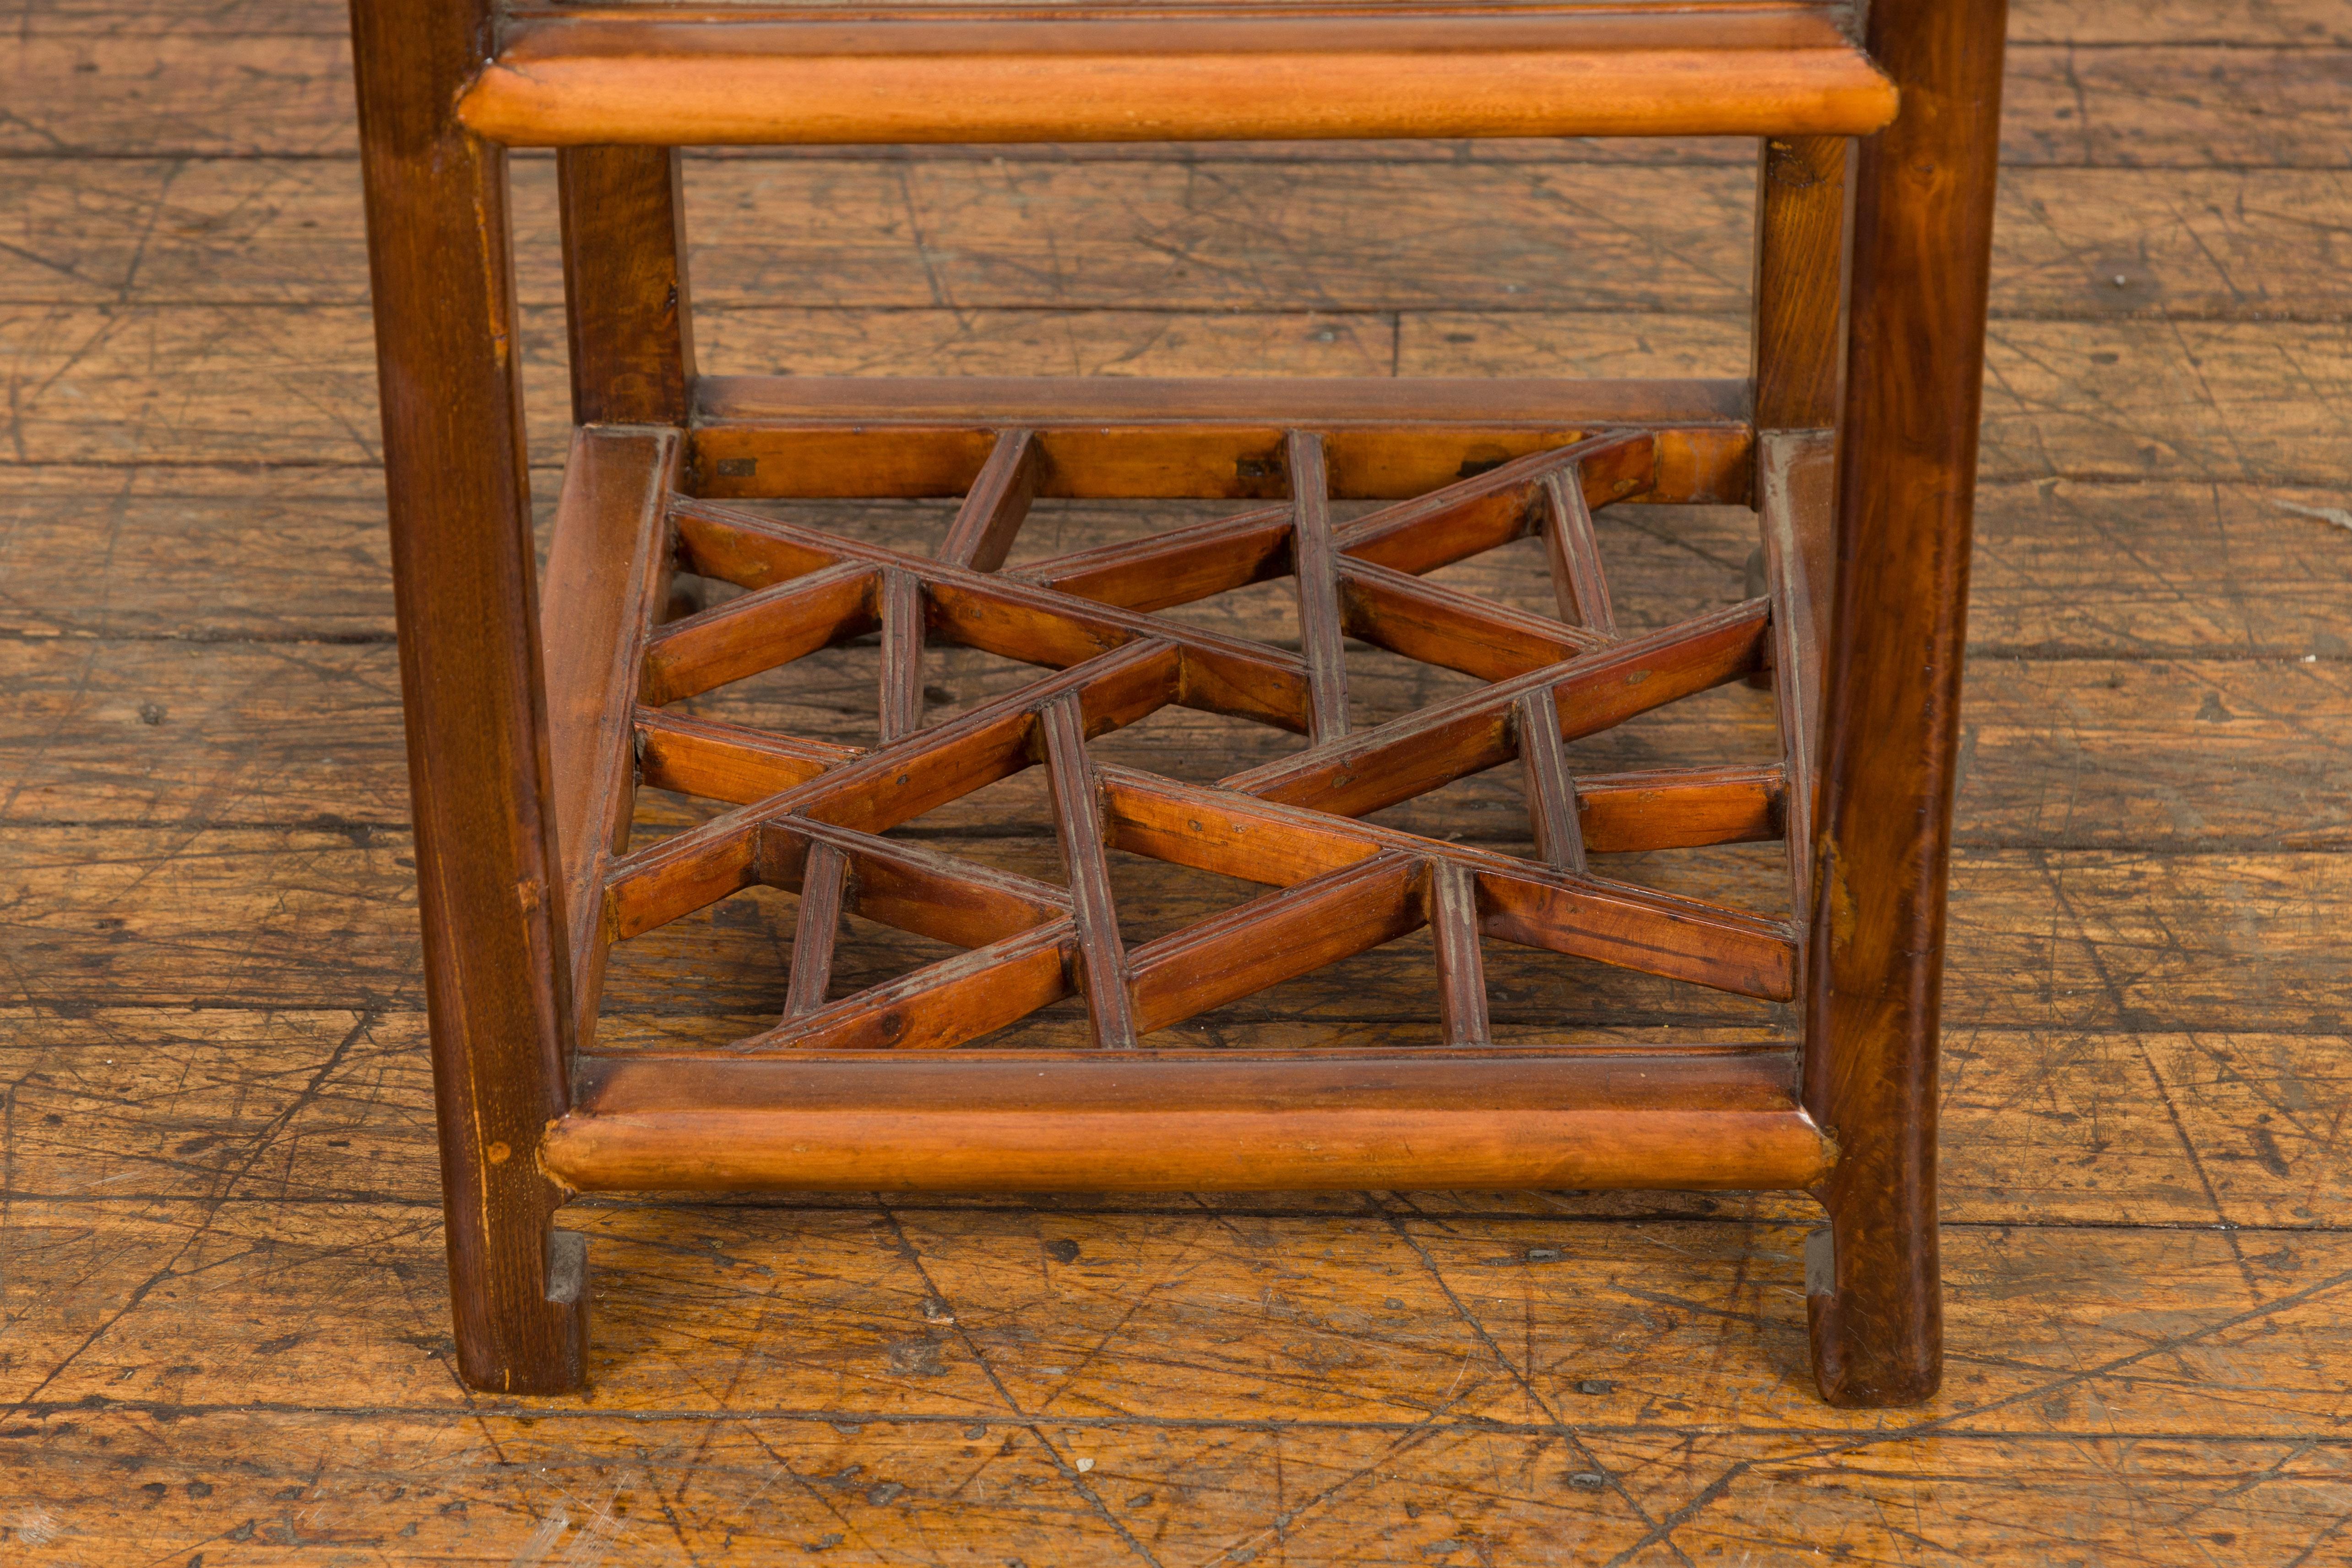 Wood Late Qing Dynasty Side Table with Low Geometric Style Shelf For Sale